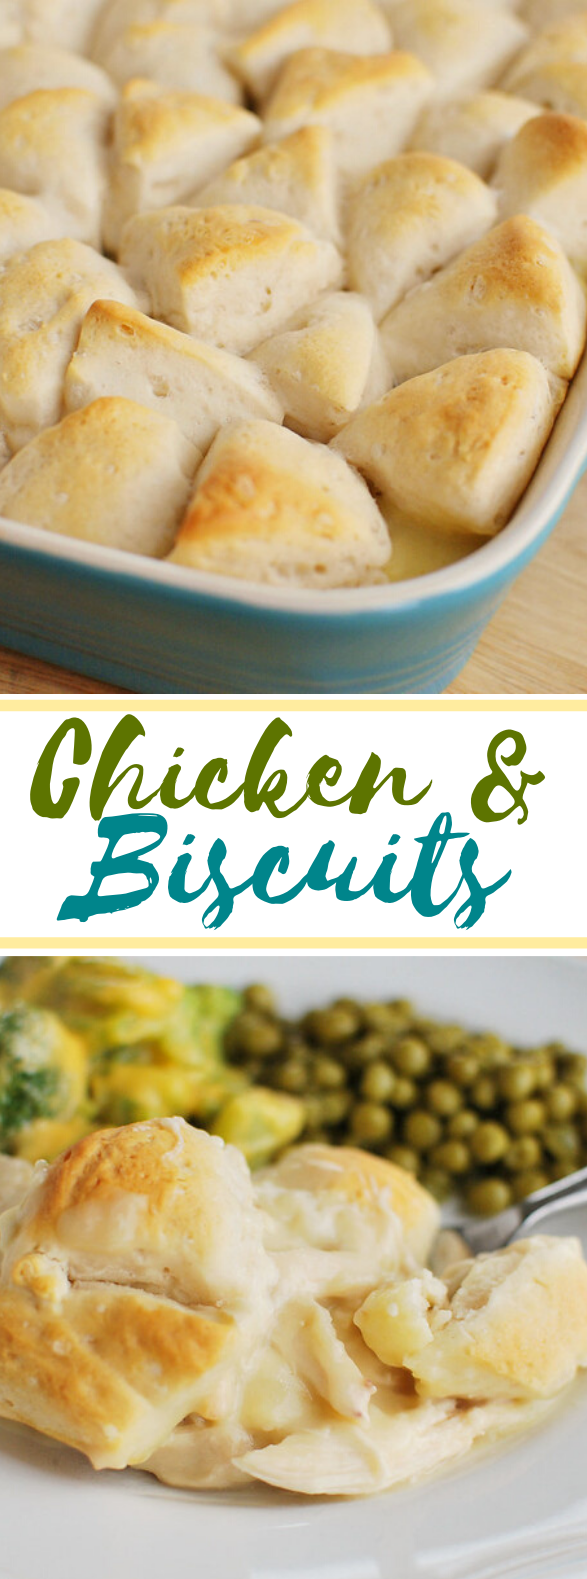 Chicken and Biscuits #dinner #familyrecipes